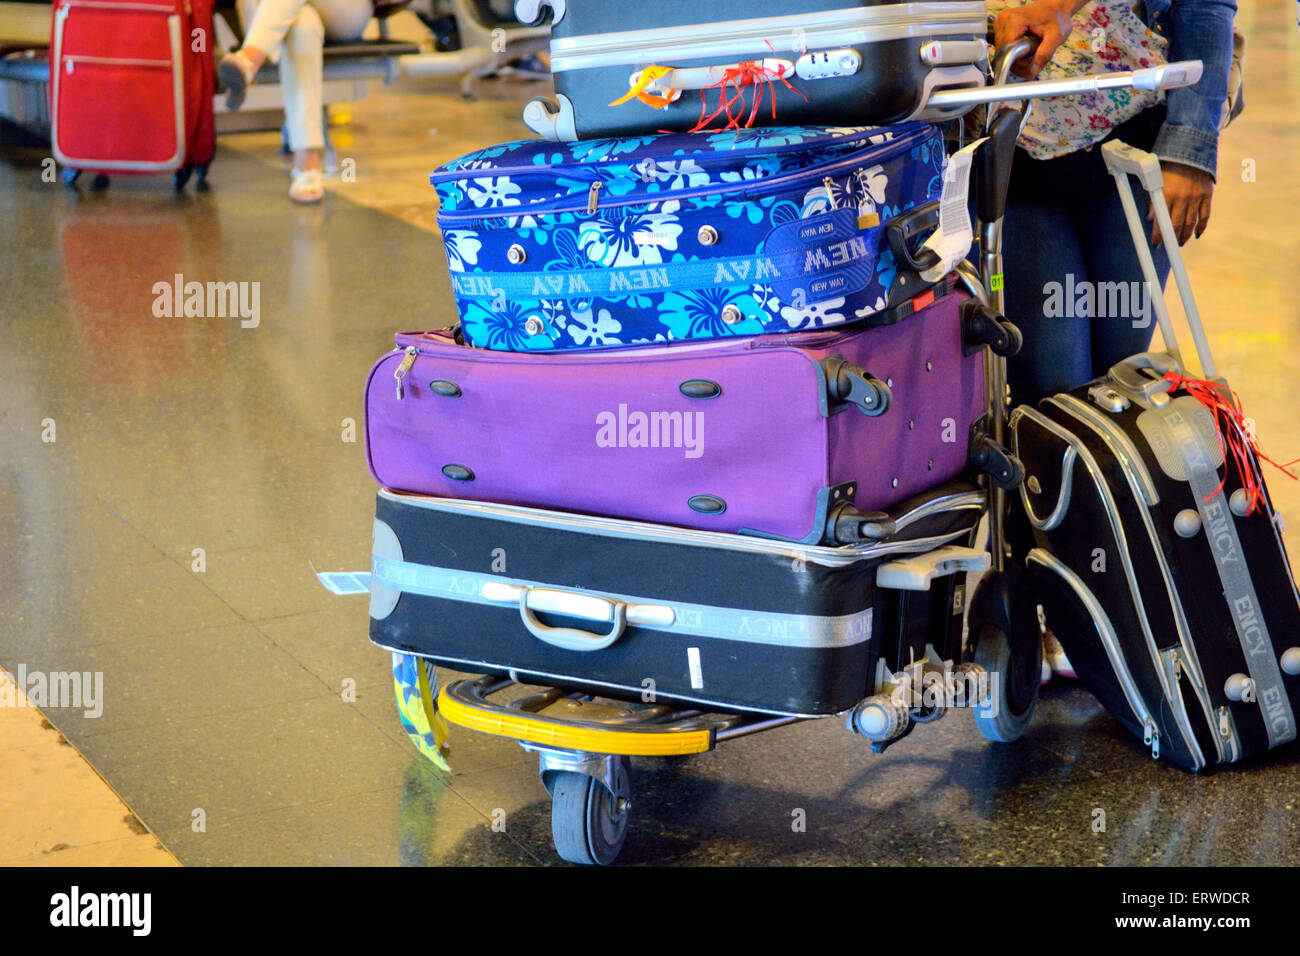 Suitcases stacked on airport trolley Stock Photo